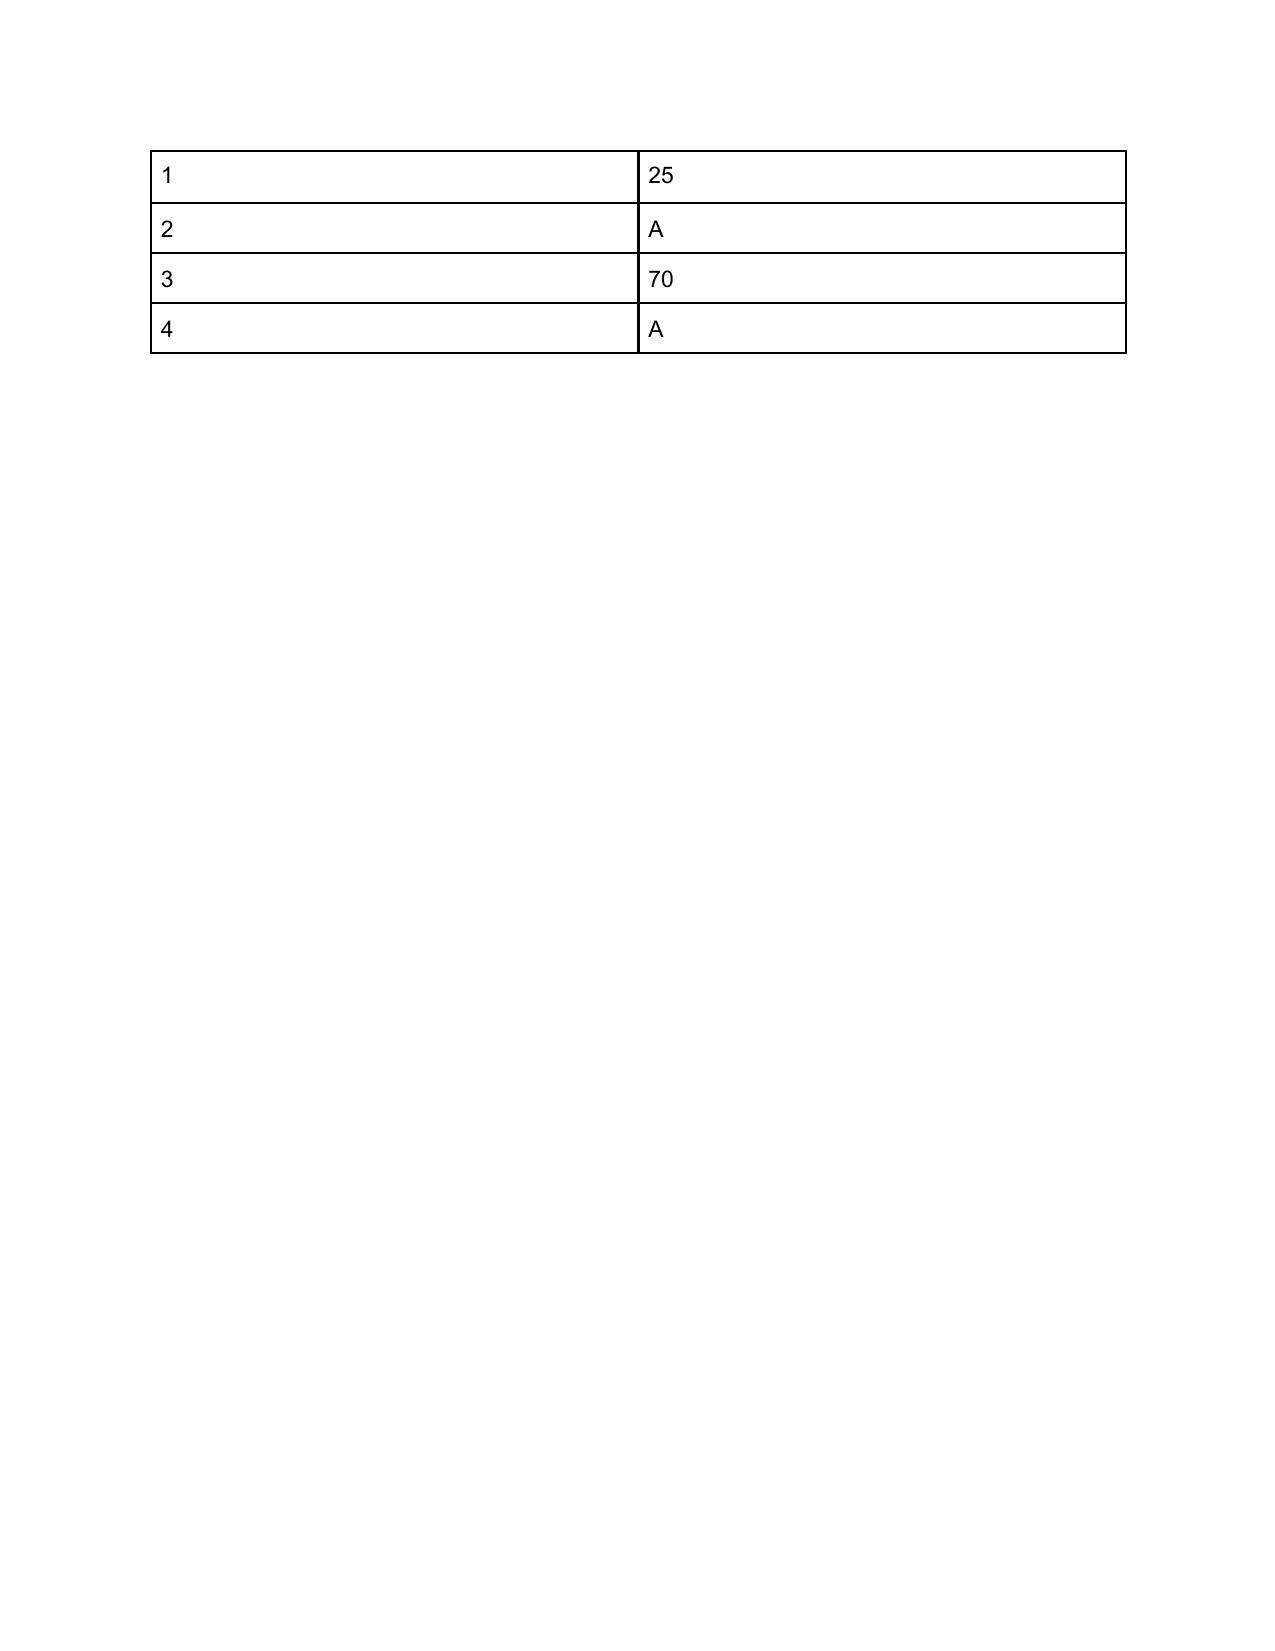 CAT 2019 CAT DILR Slot 2 Answer Key - Page 3